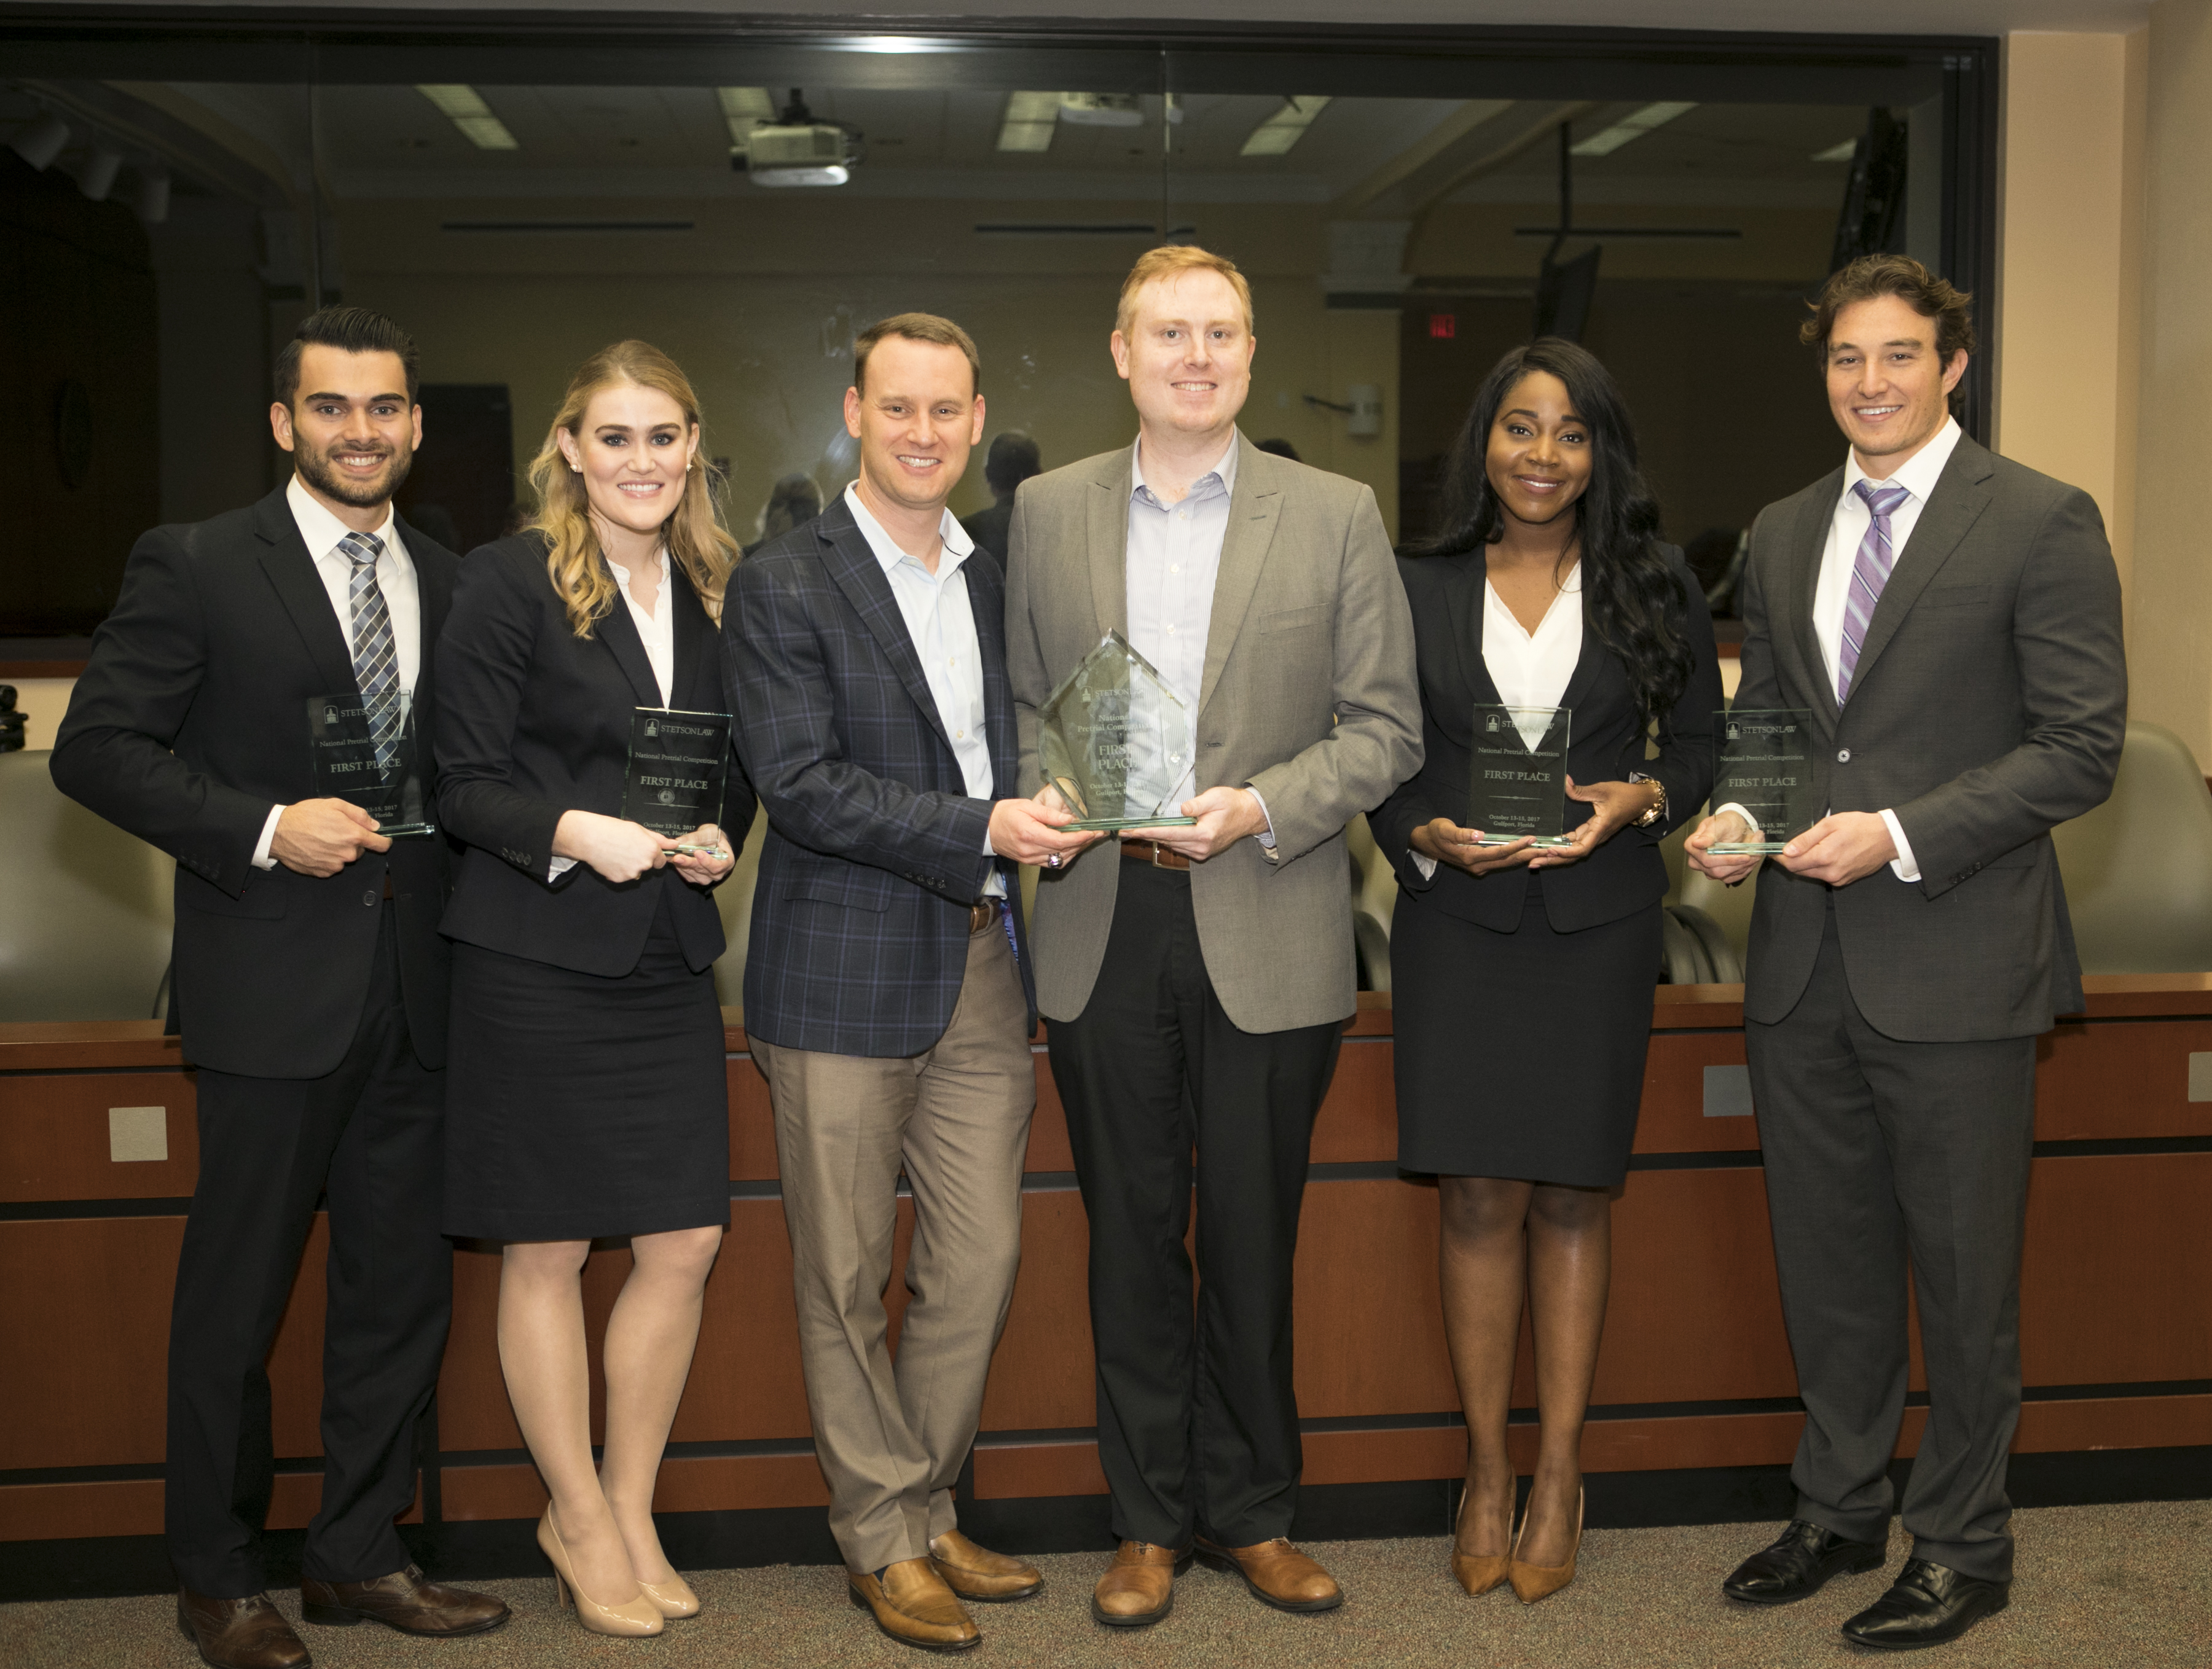 A team from Texas Tech won first place in the National Pretrial Competition at Stetson.